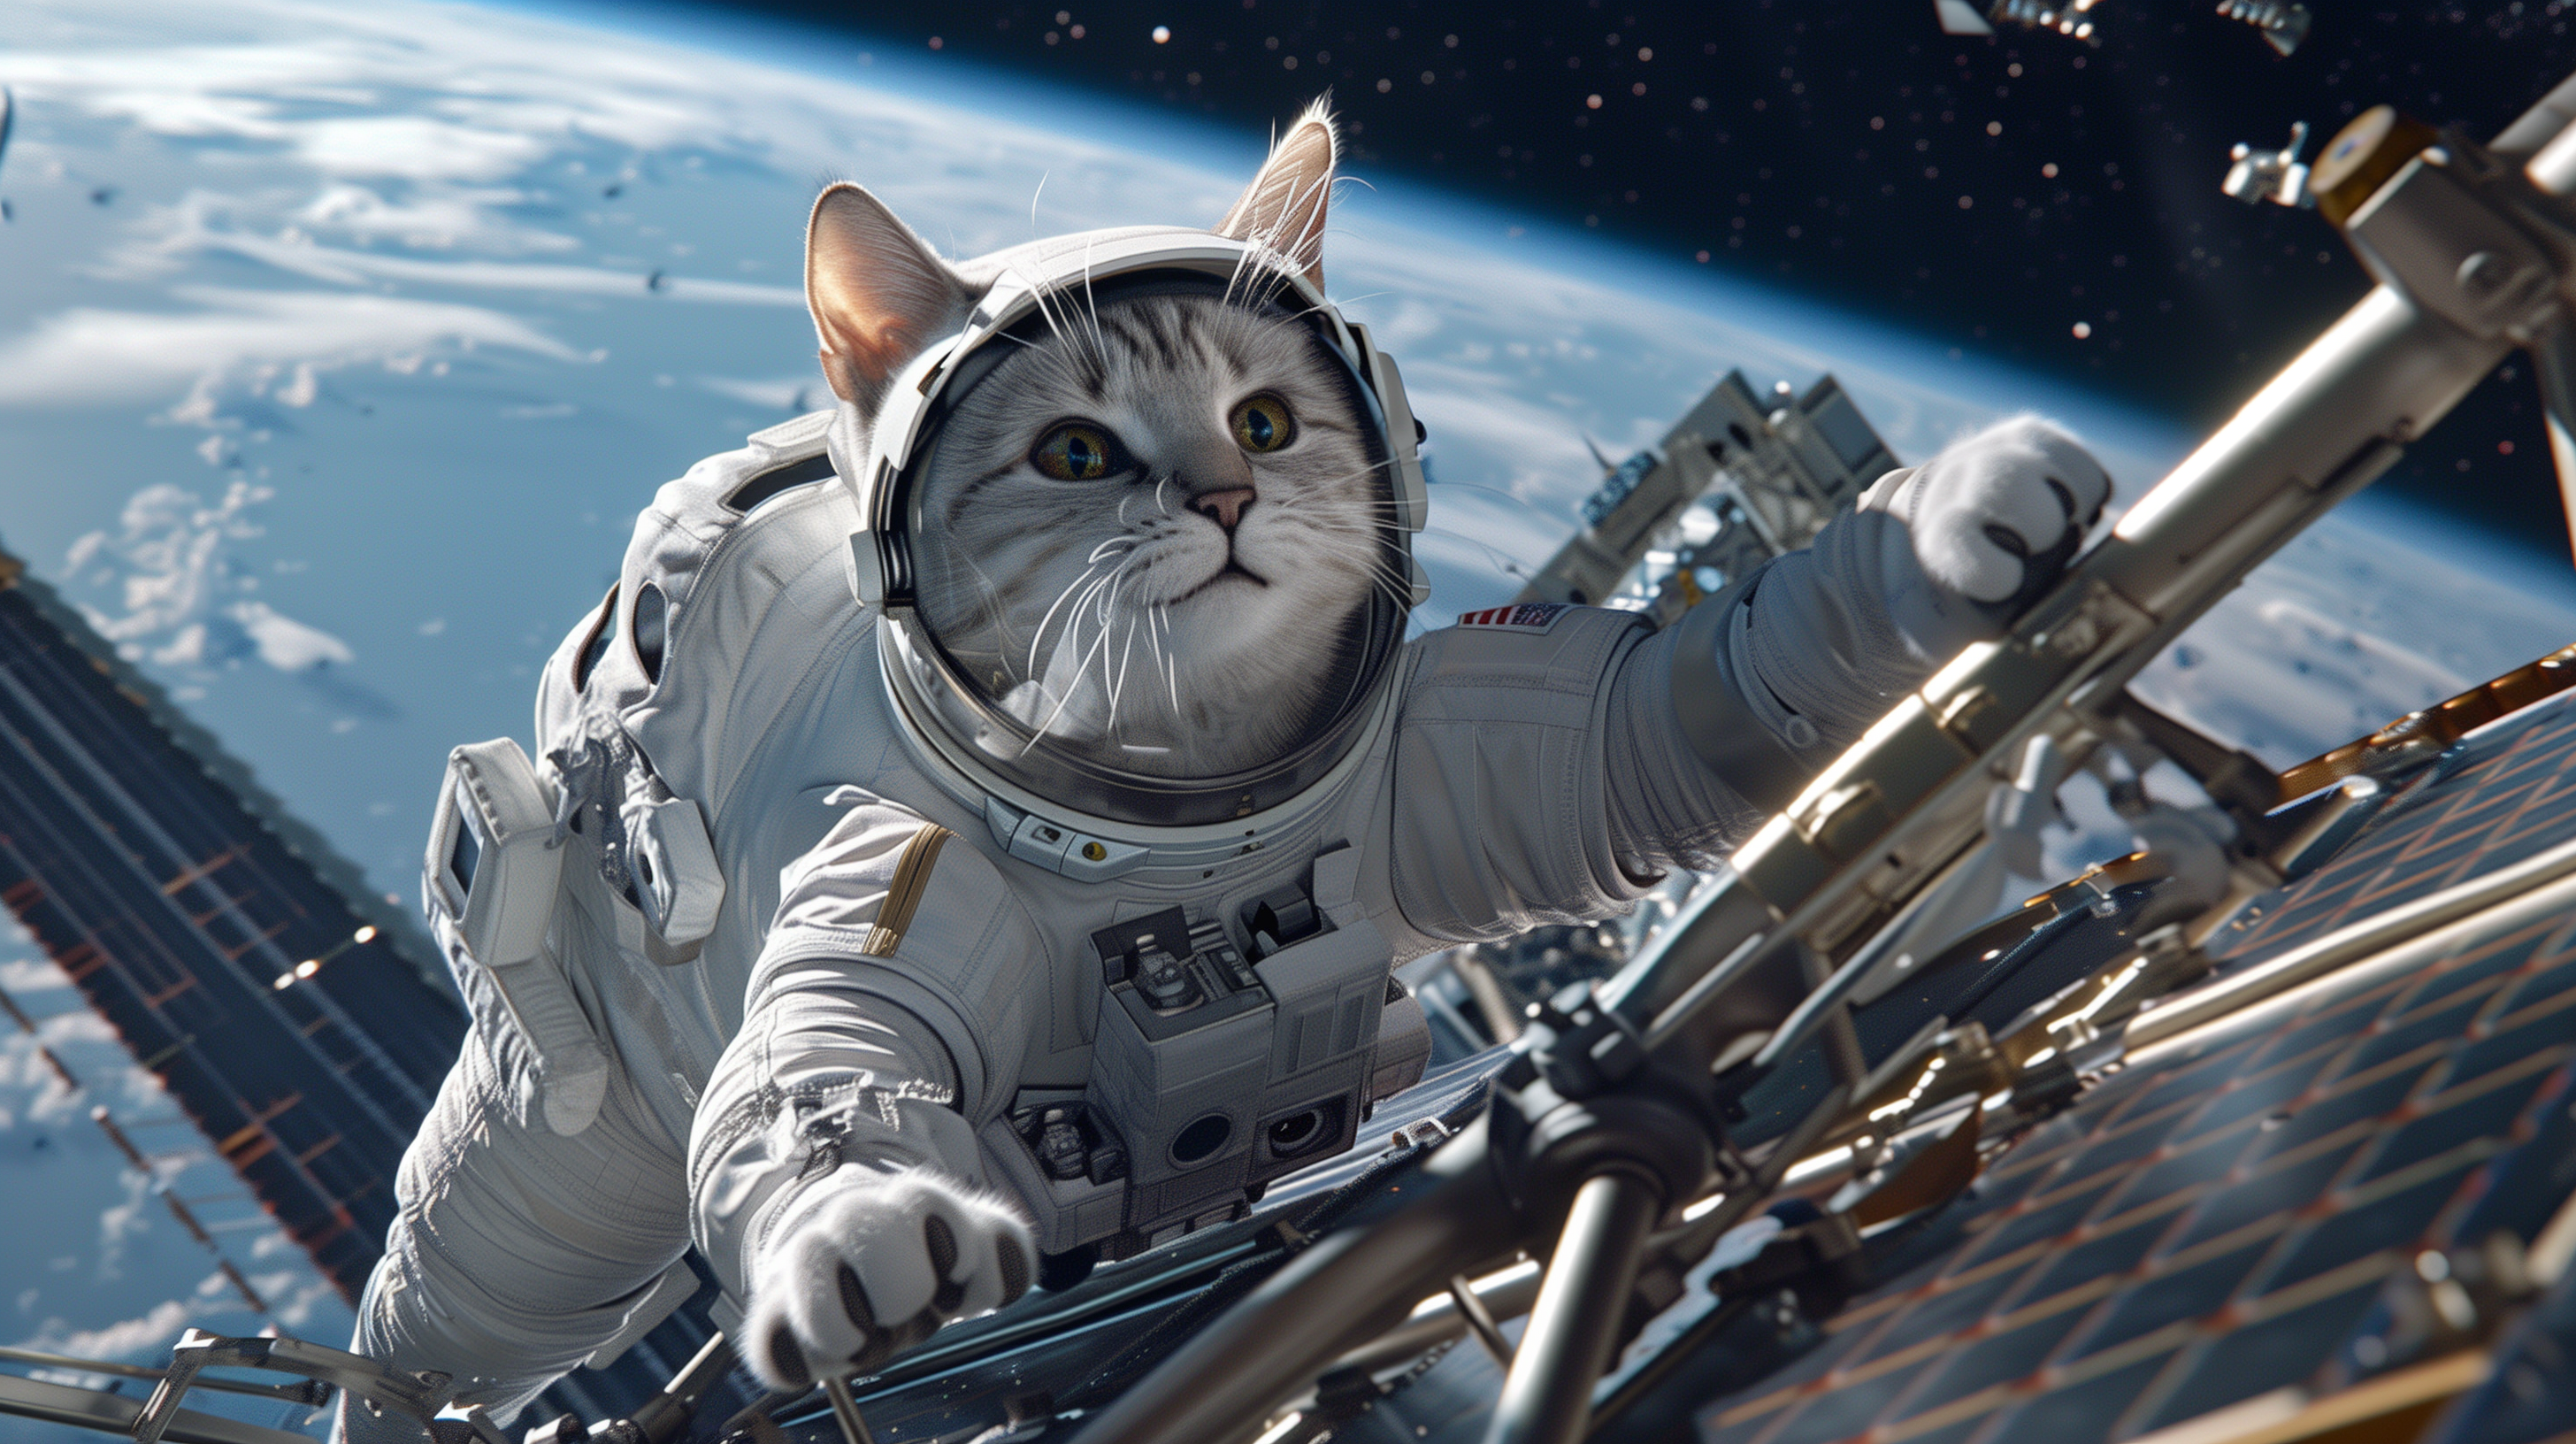 11. a better image of a cat in space